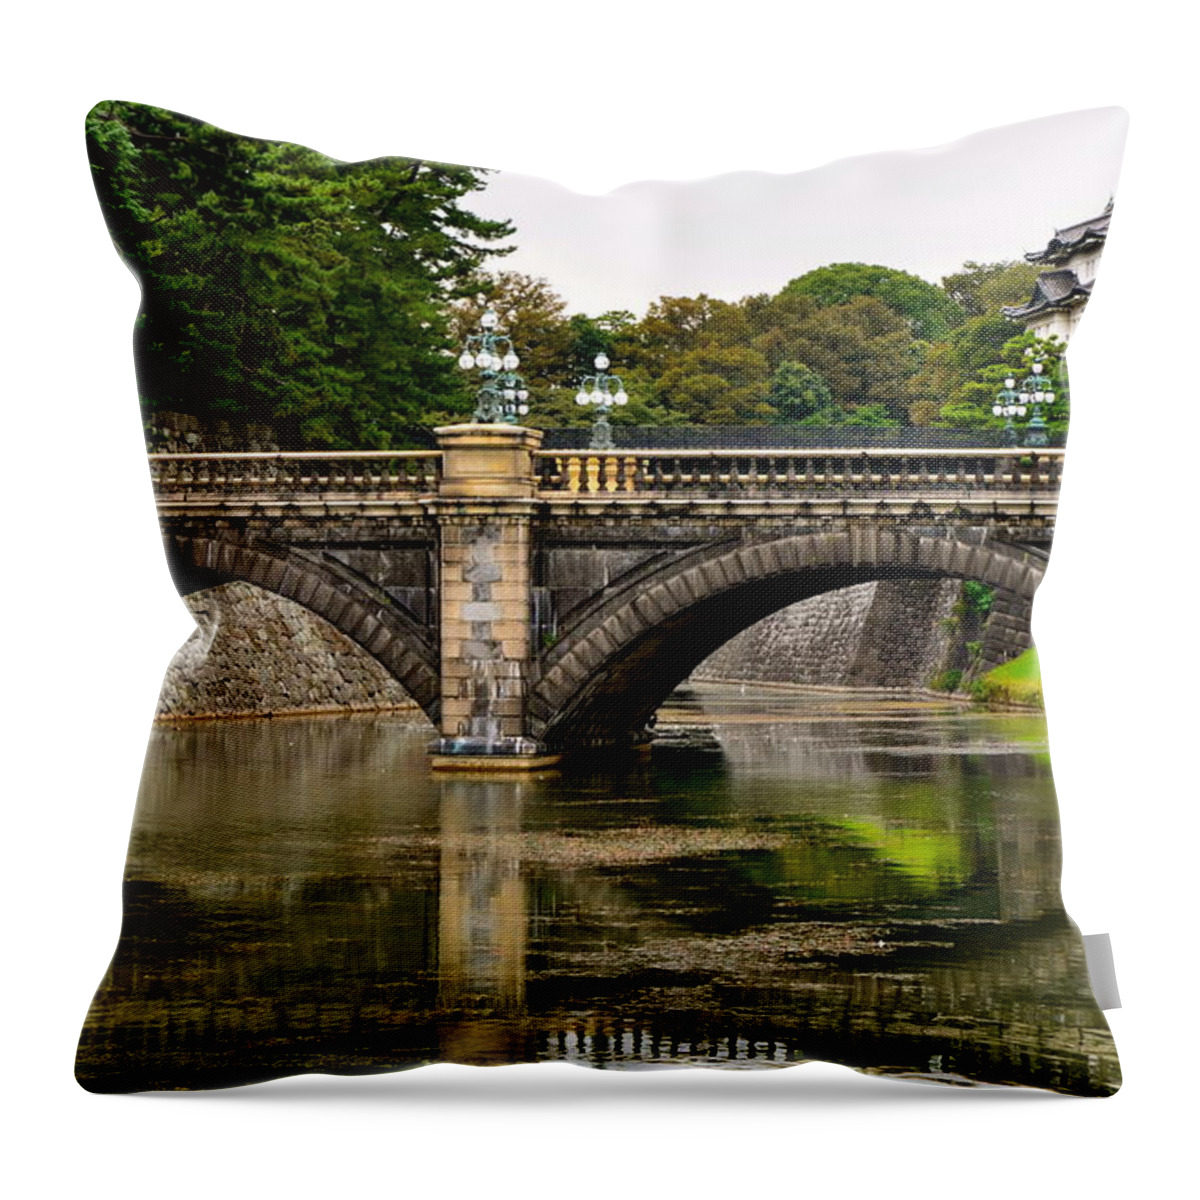 Japan Throw Pillow featuring the photograph Imperial Garden by Corinne Rhode